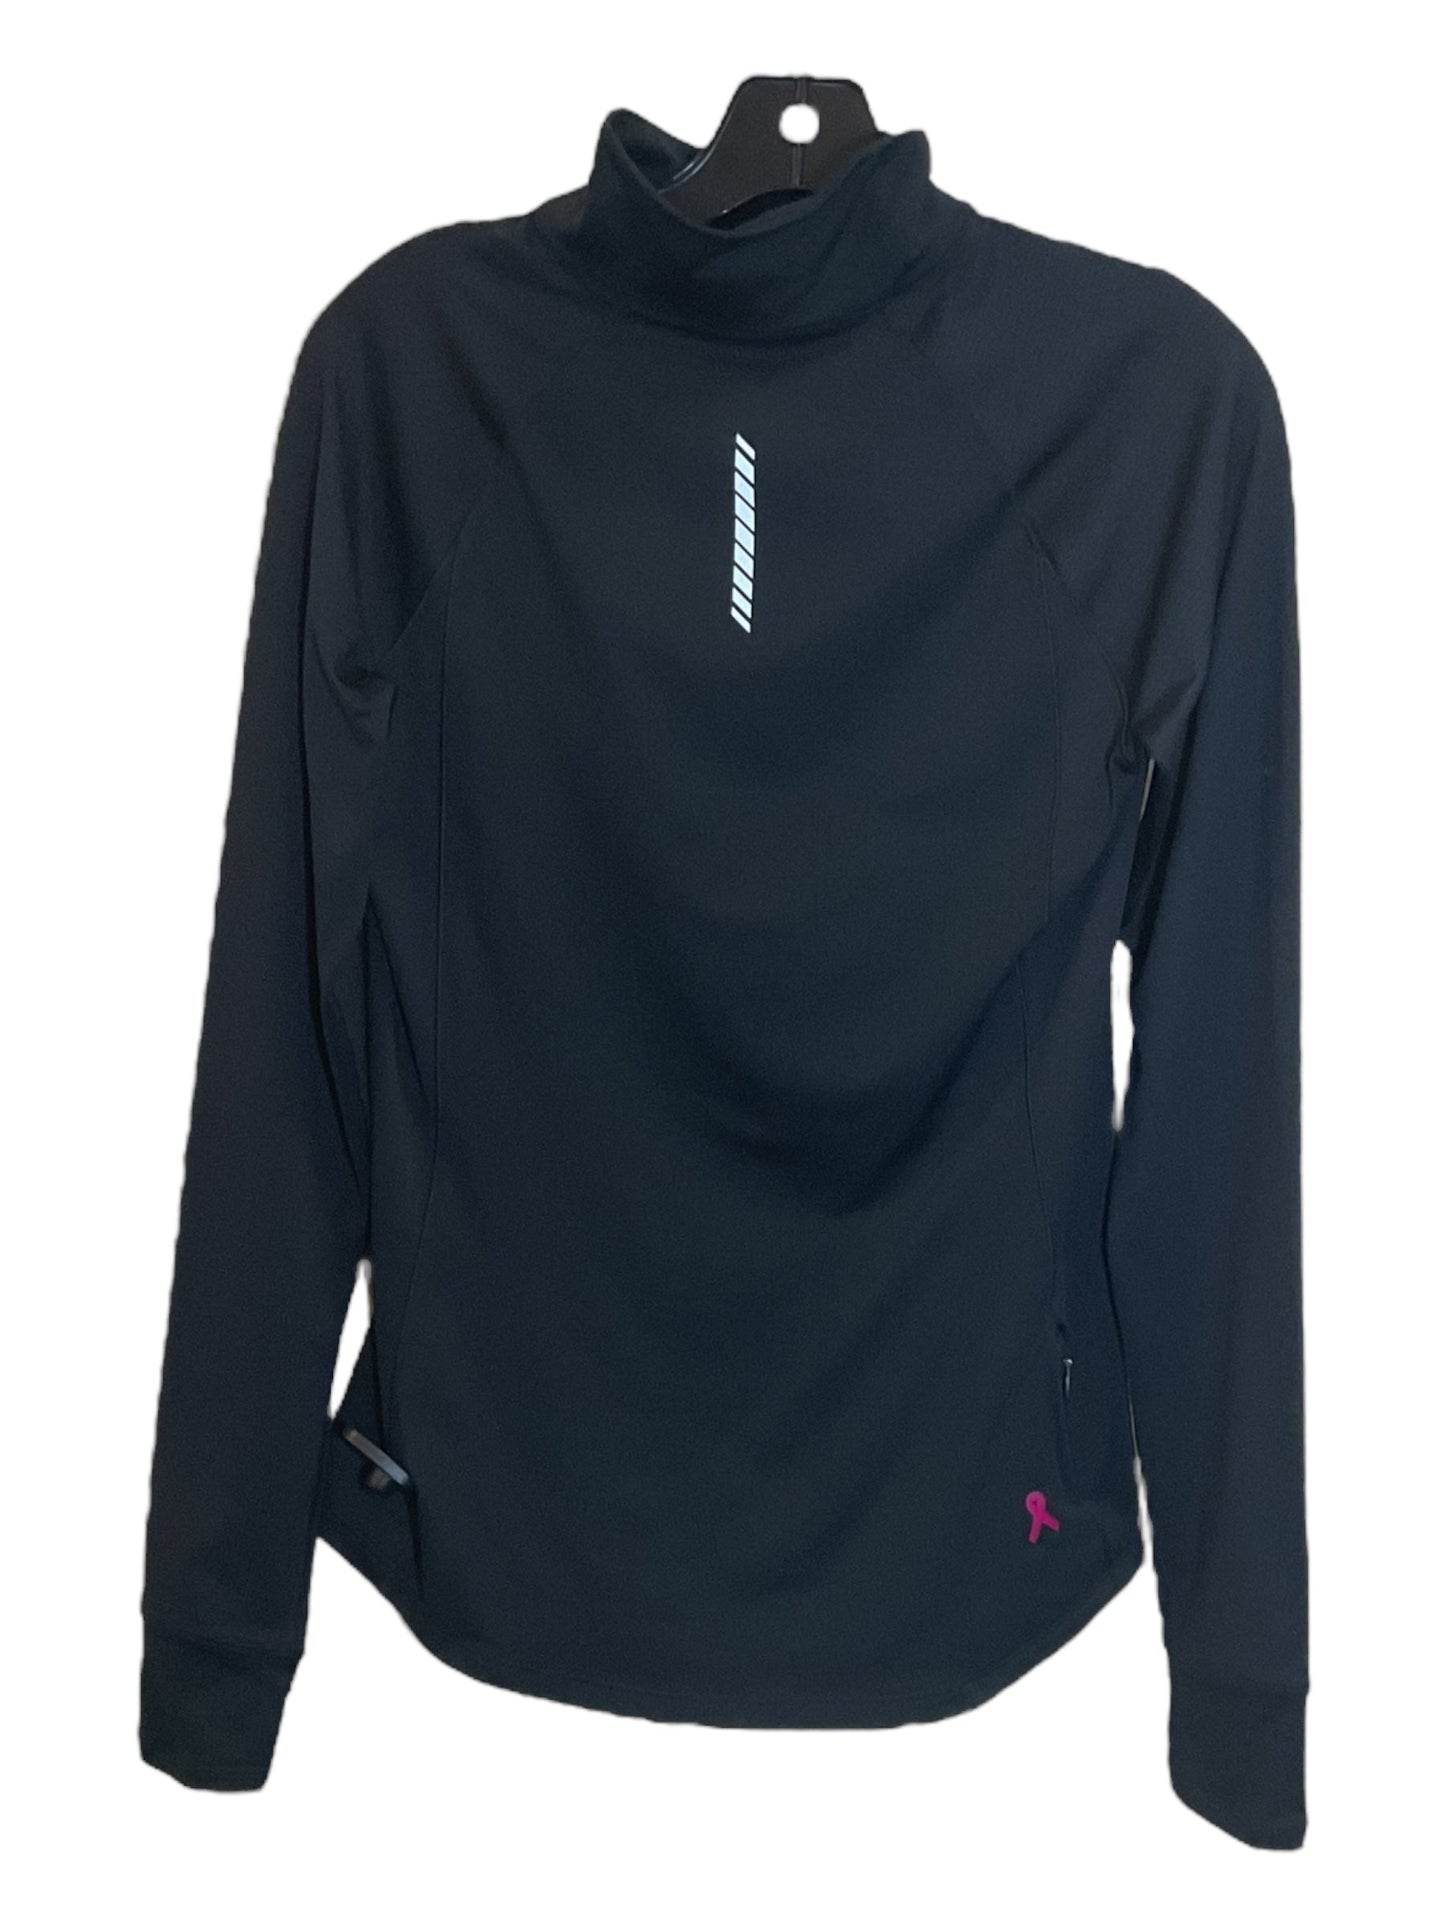 Black Athletic Top Long Sleeve Collar Under Armour, Size M